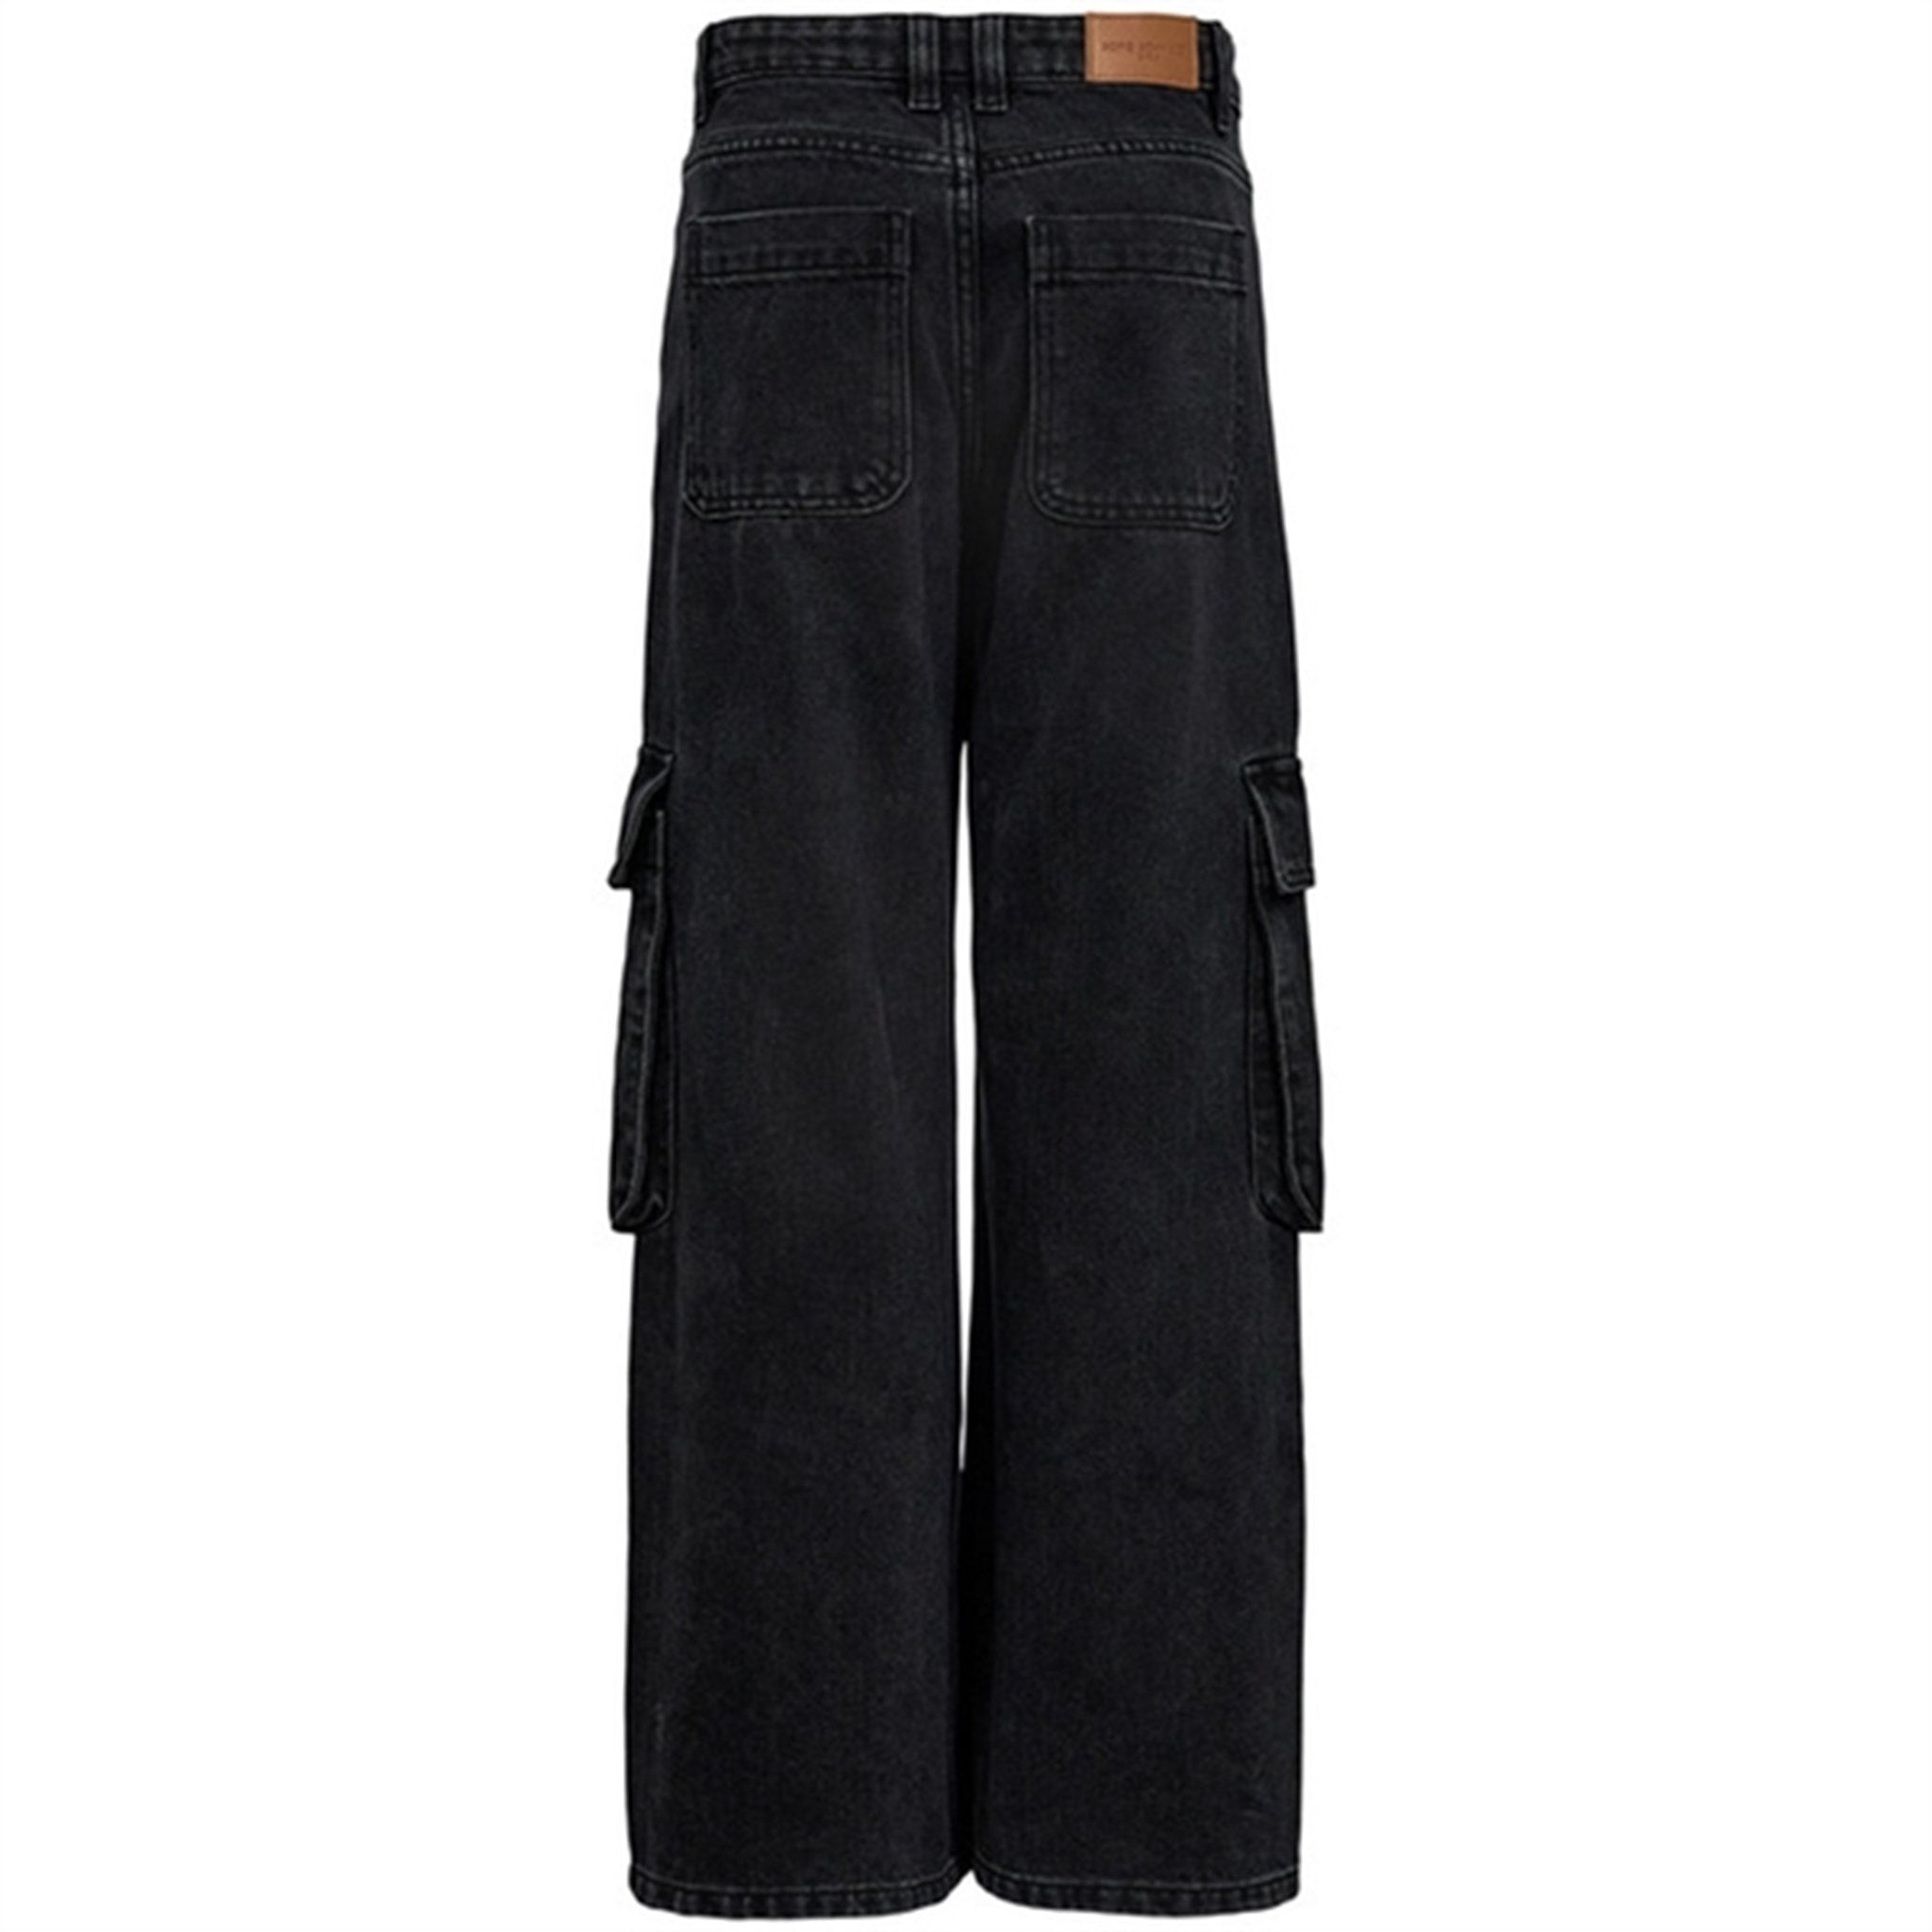 Sofie Schnoor Young Washed Black Pants 2